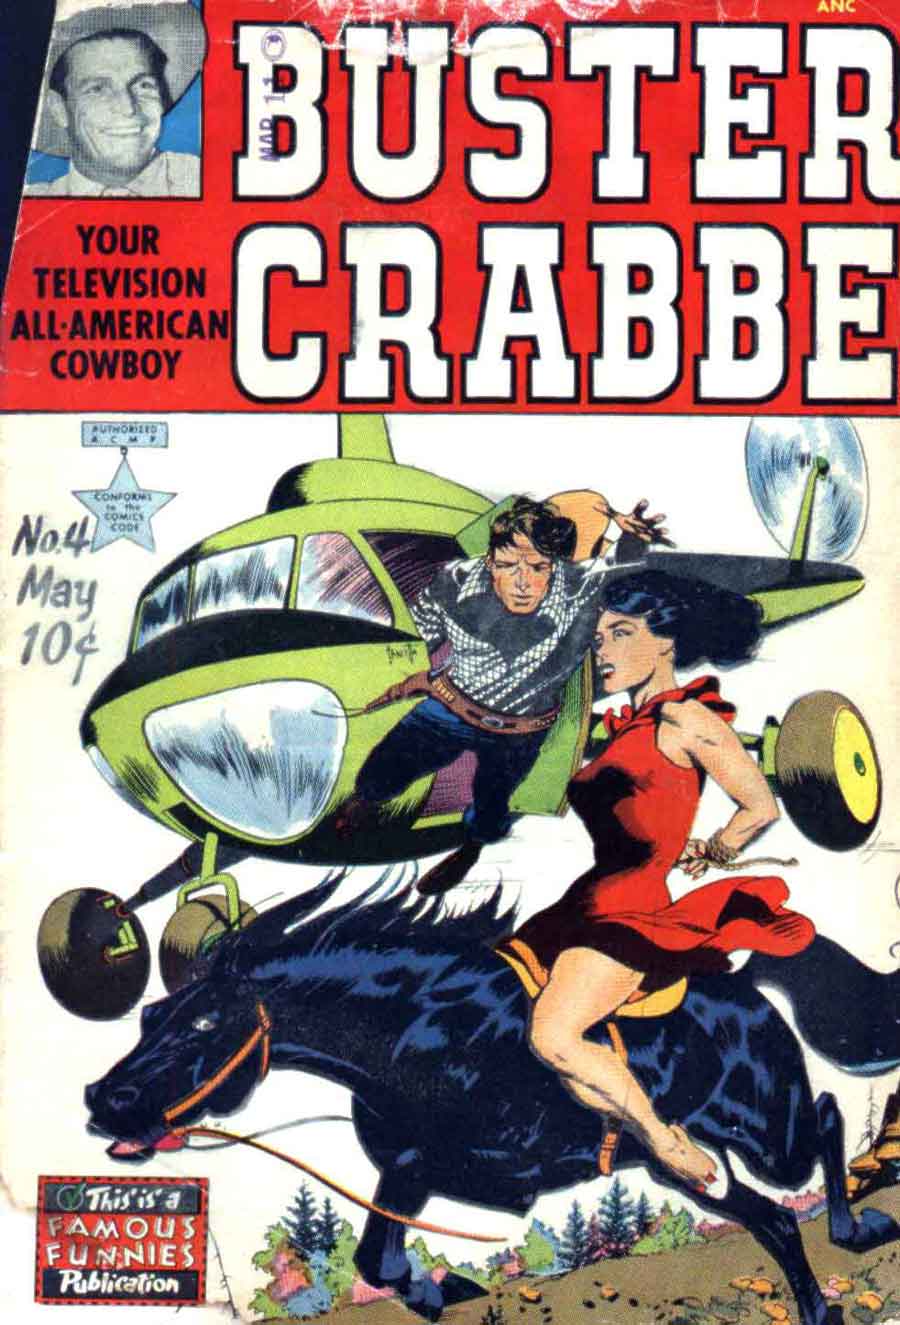 Buster Crabbe #4 golden age 1950s comic book cover art by Frank Frazetta